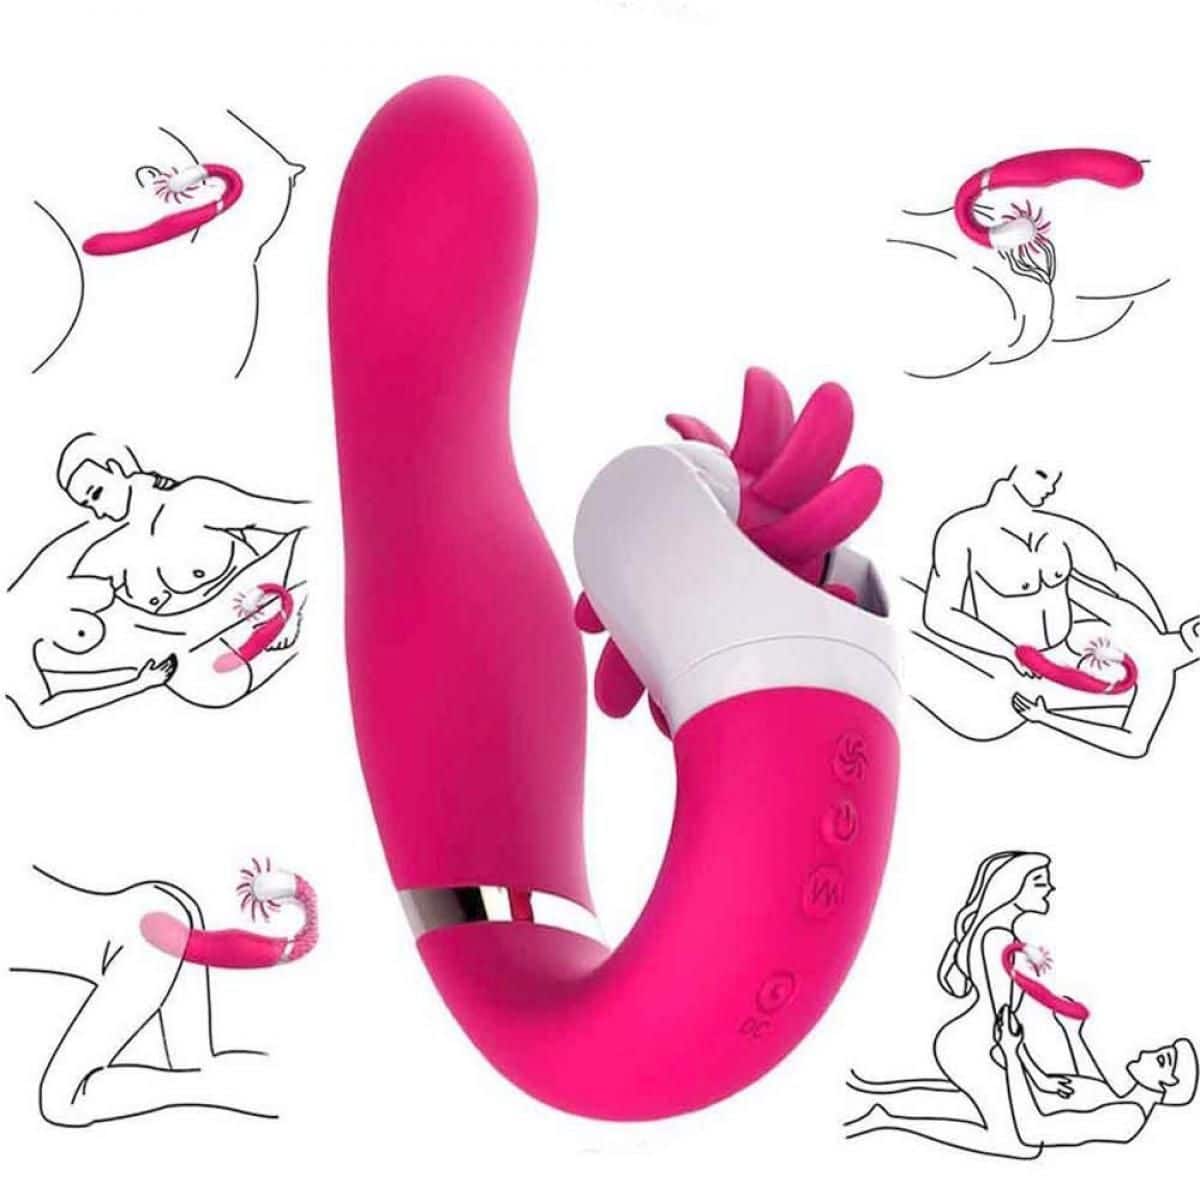 Dave Vibrator  features